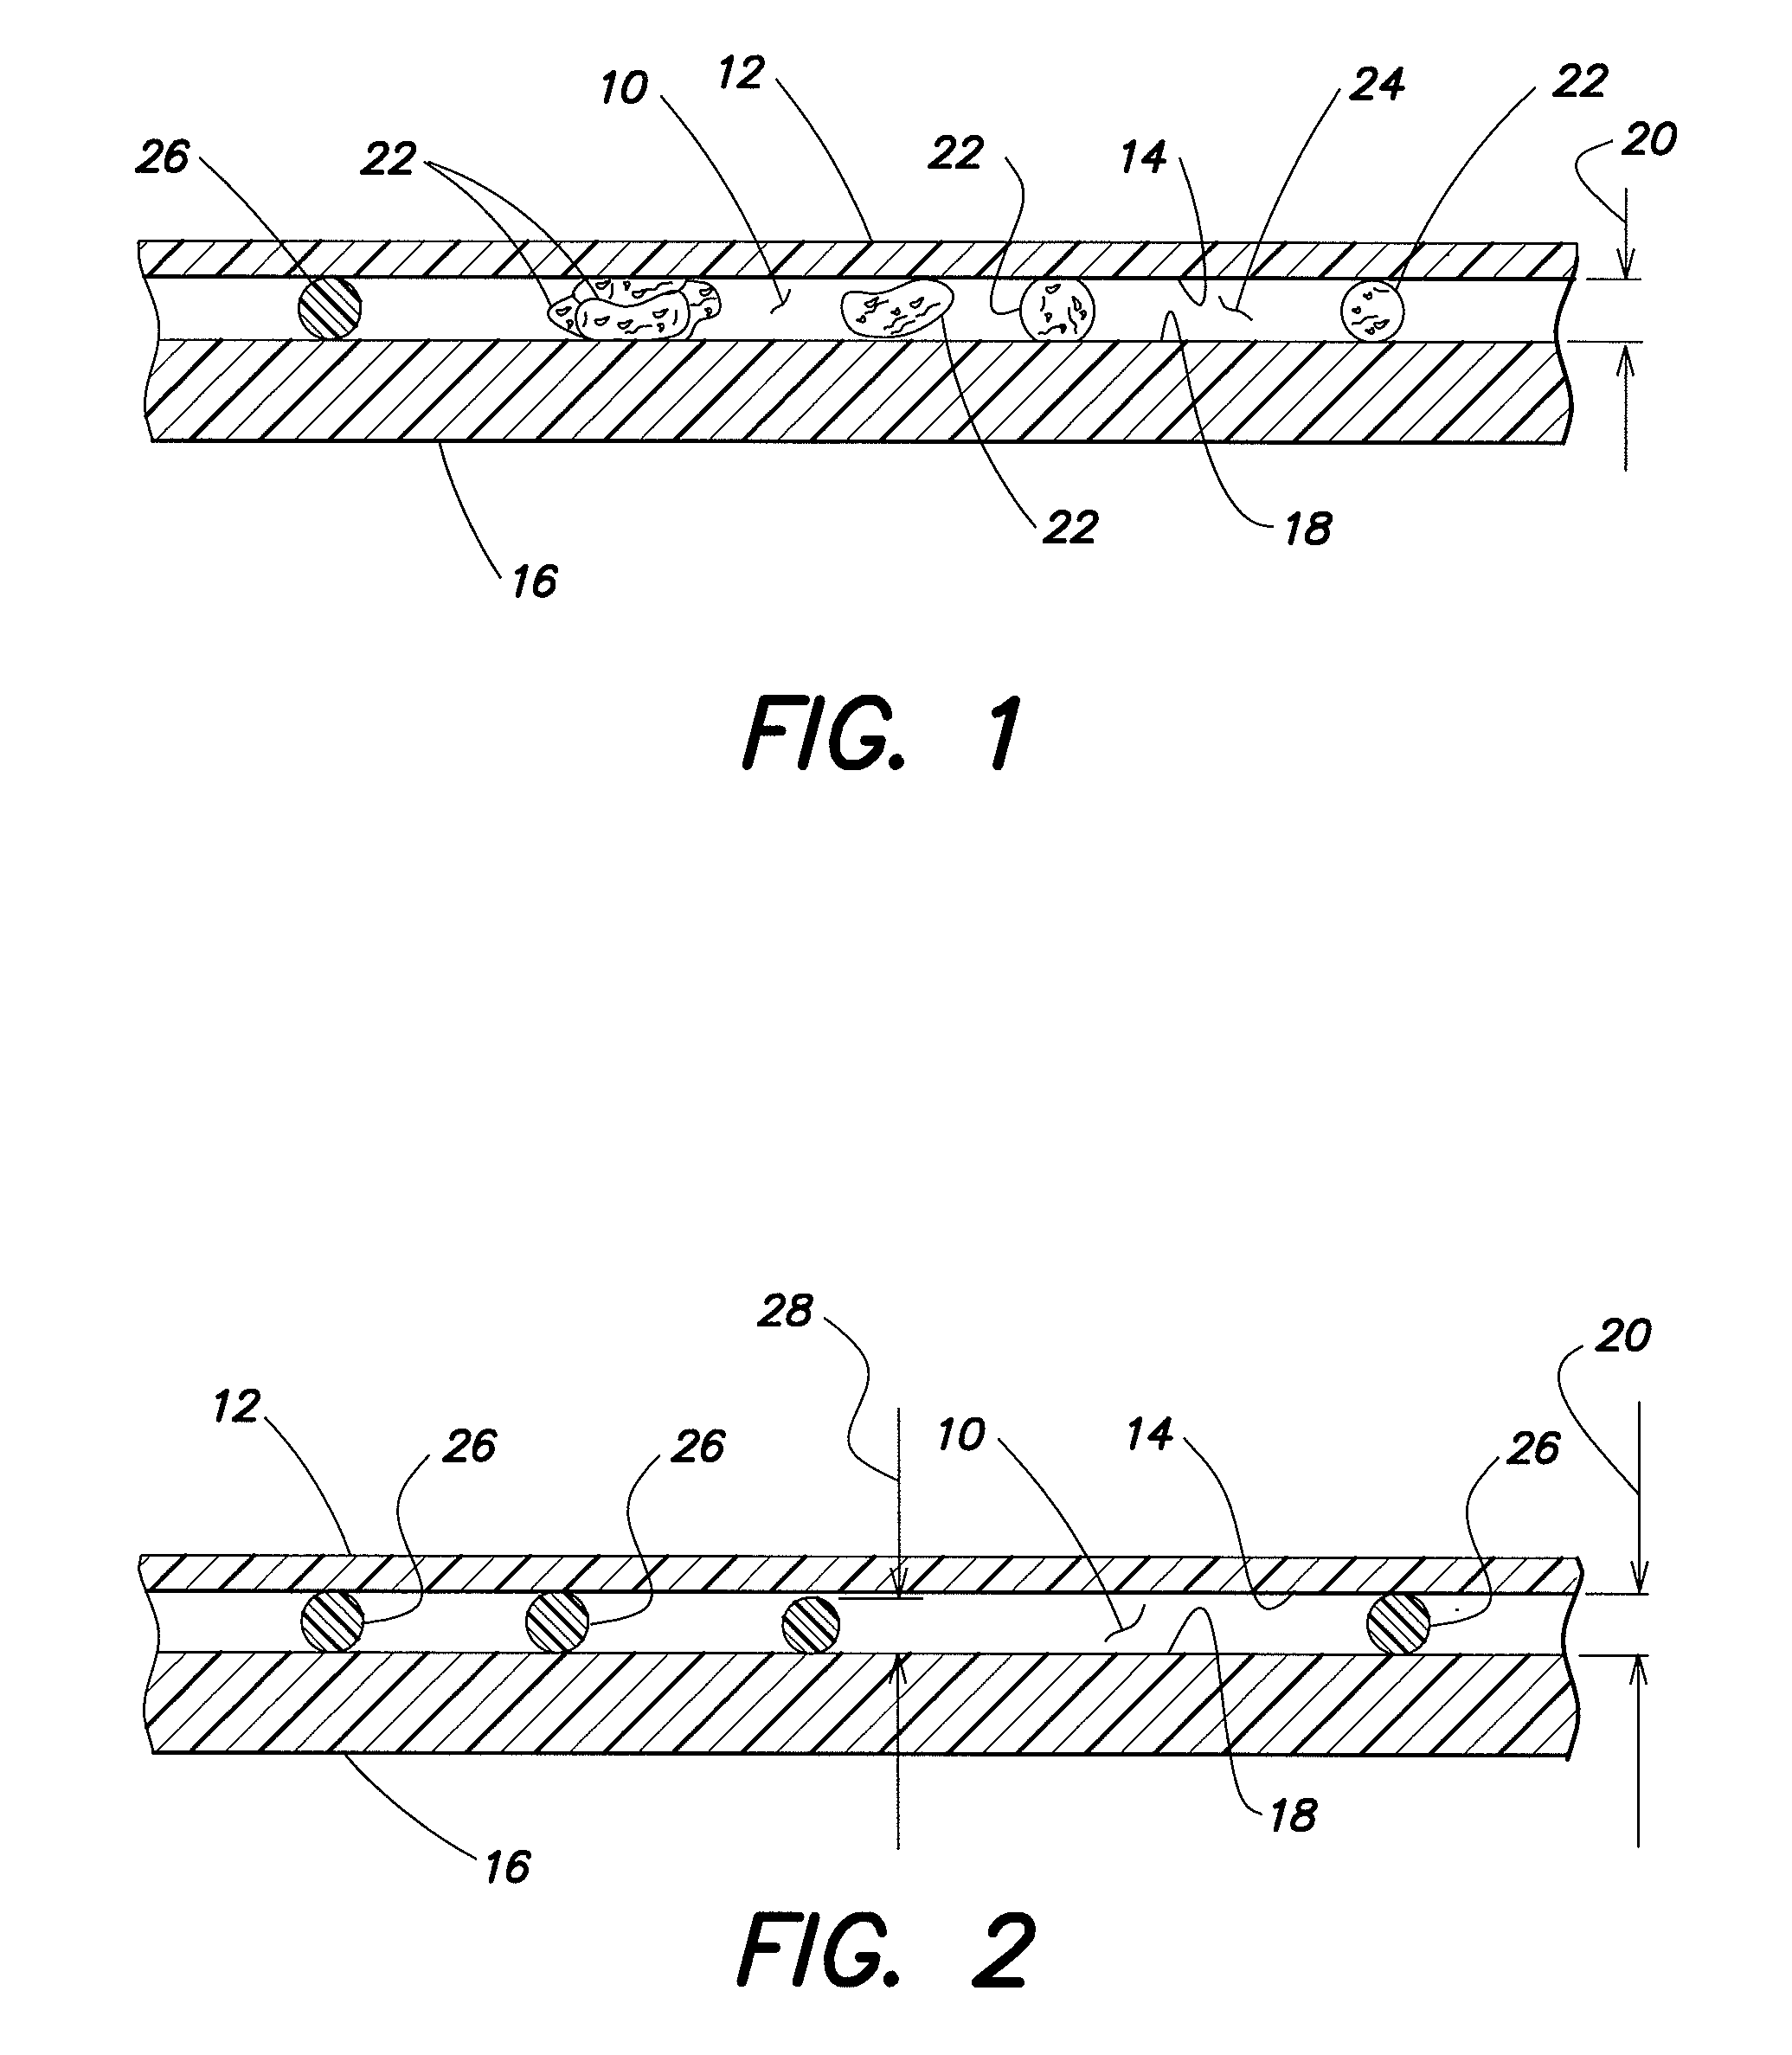 Method for measuring the area of a sample disposed within an analysis chamber